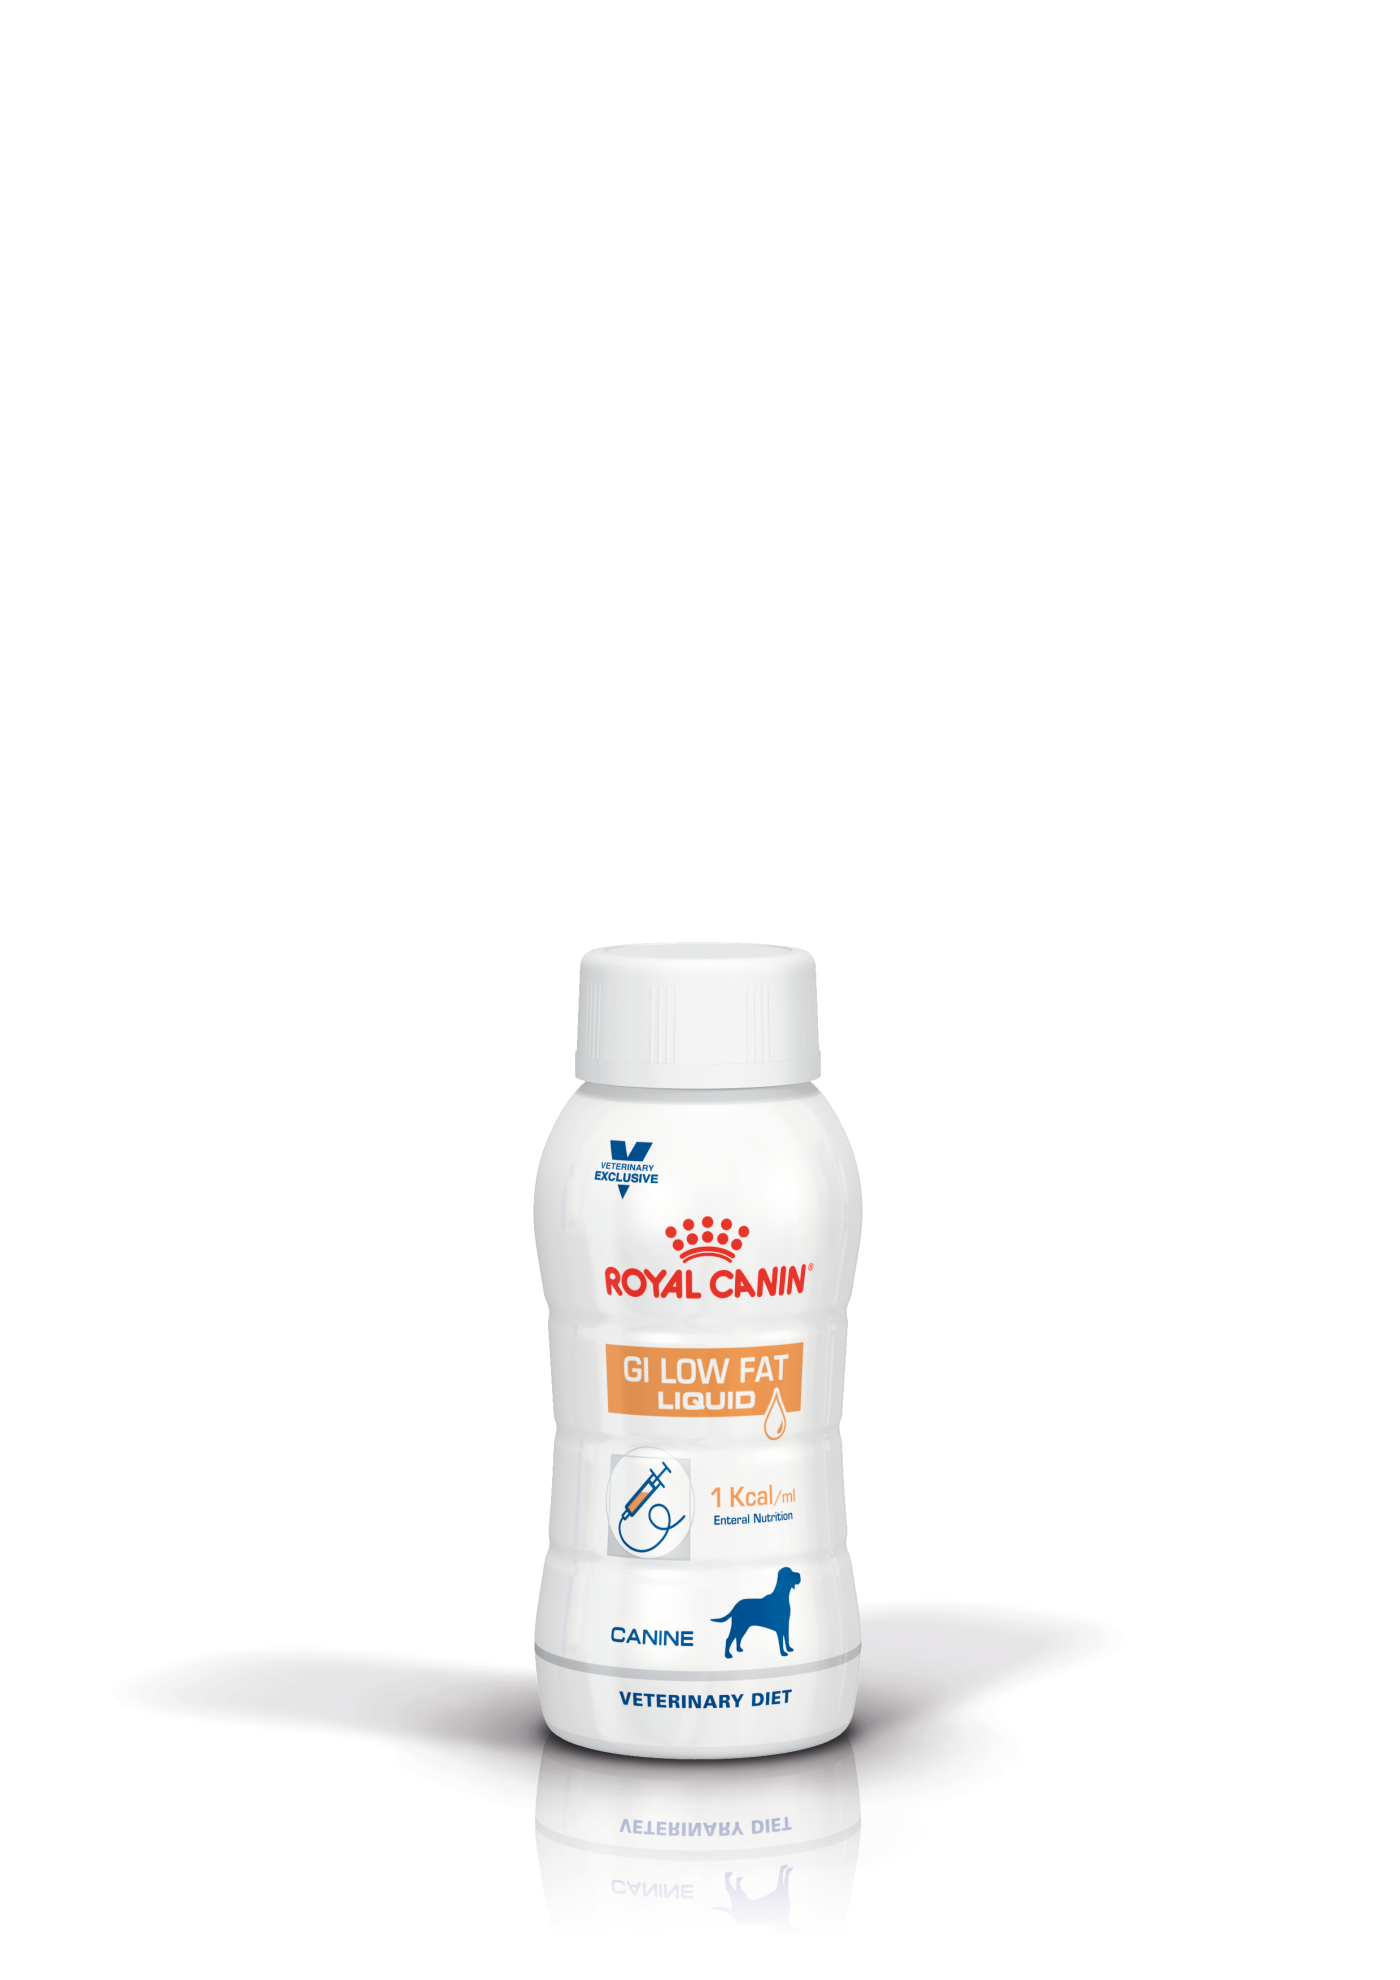 royal canin low